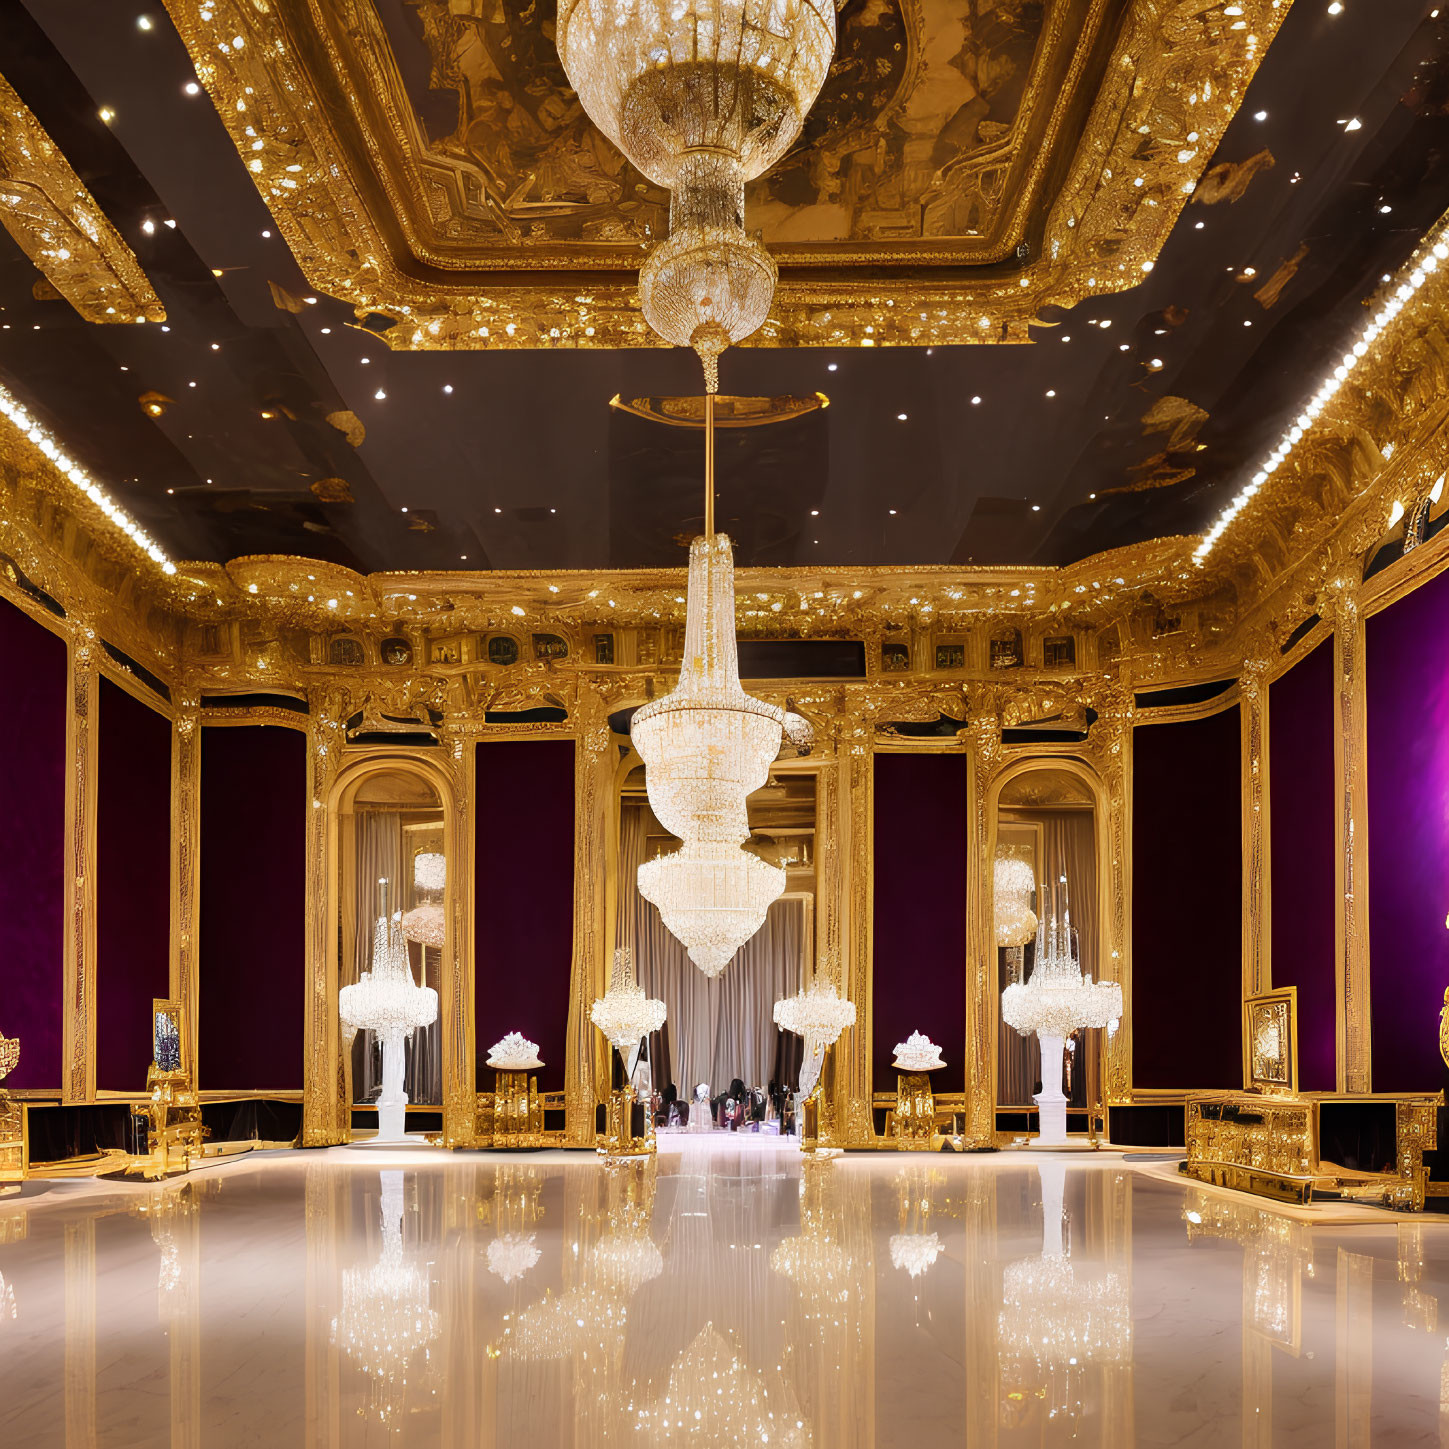 Luxurious Hall with Golden Trim, Grand Chandeliers, Purple Drapes, Glossy Floor